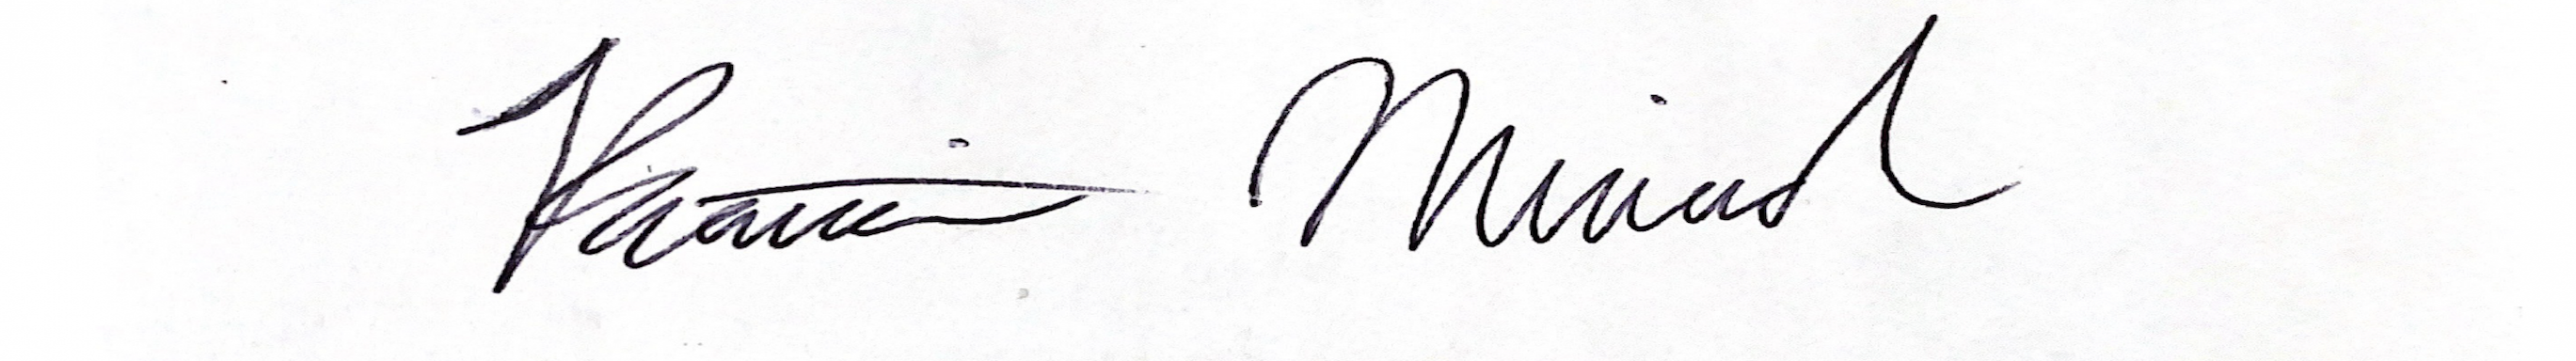 Signature of Katie Millard, Editor-In-Chief of The Post